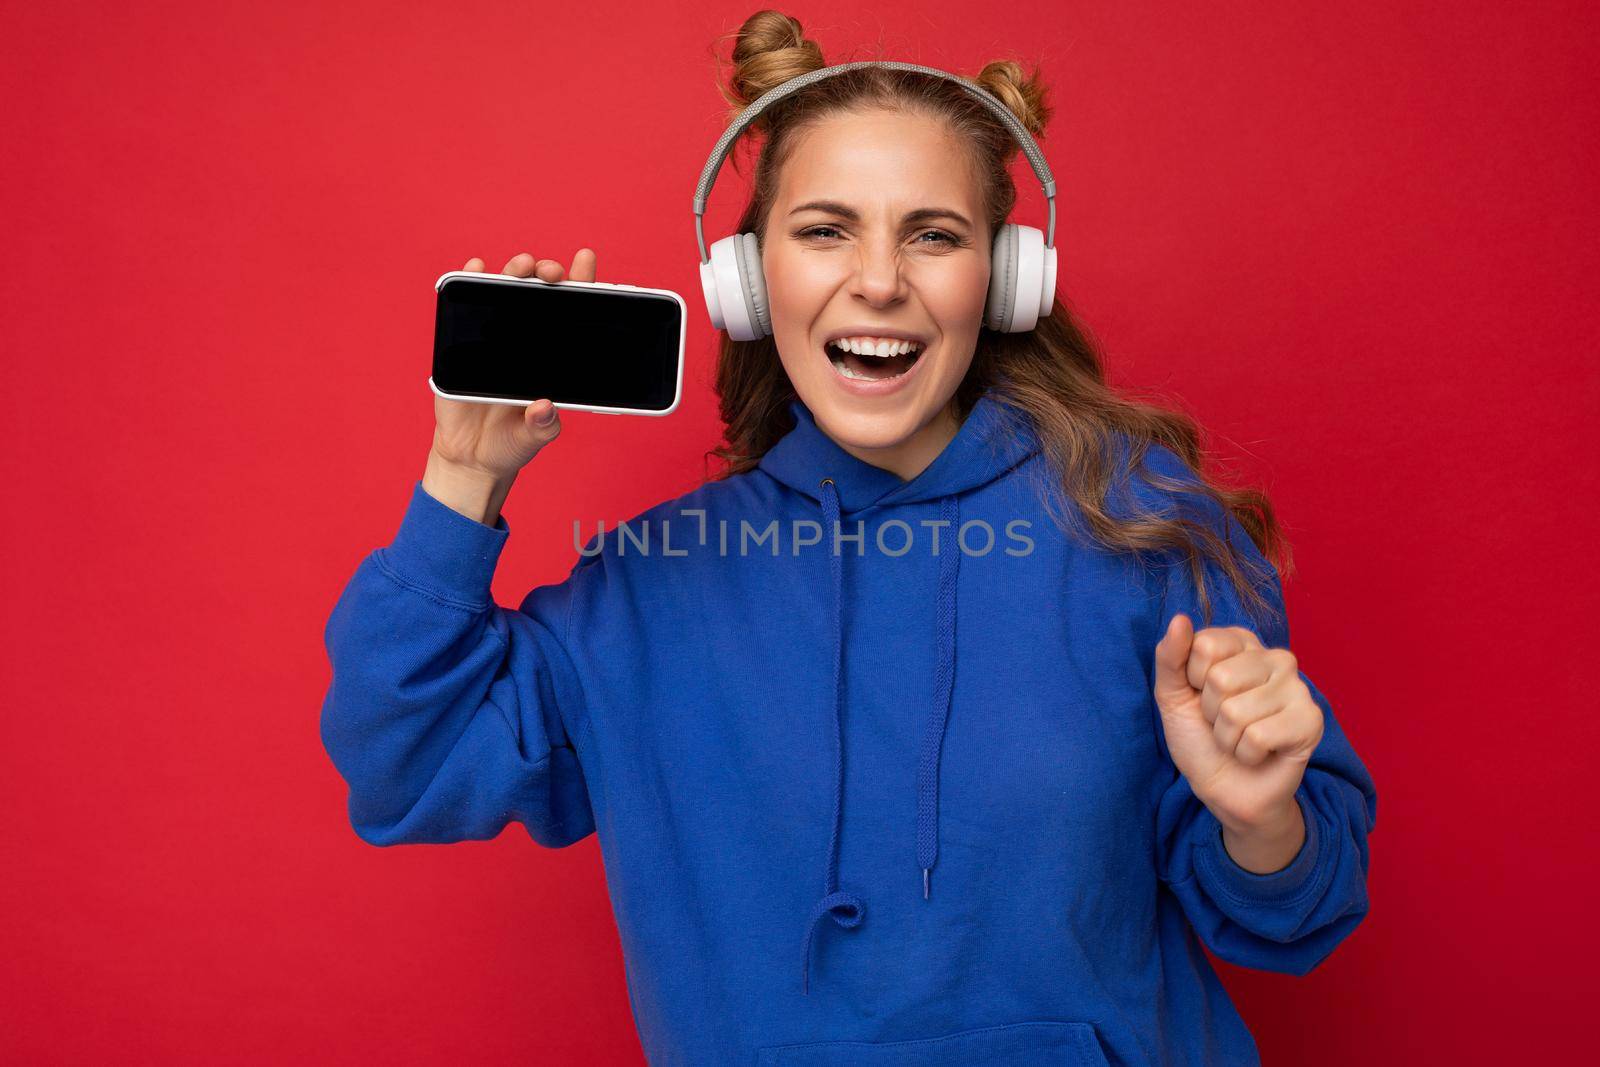 Beautiful happy smiling young woman wearing stylish casual outfit isolated on background wall holding and showing mobile phone with empty display for mockup wearing white bluetooth headphones listening to music and having fun looking at camera.